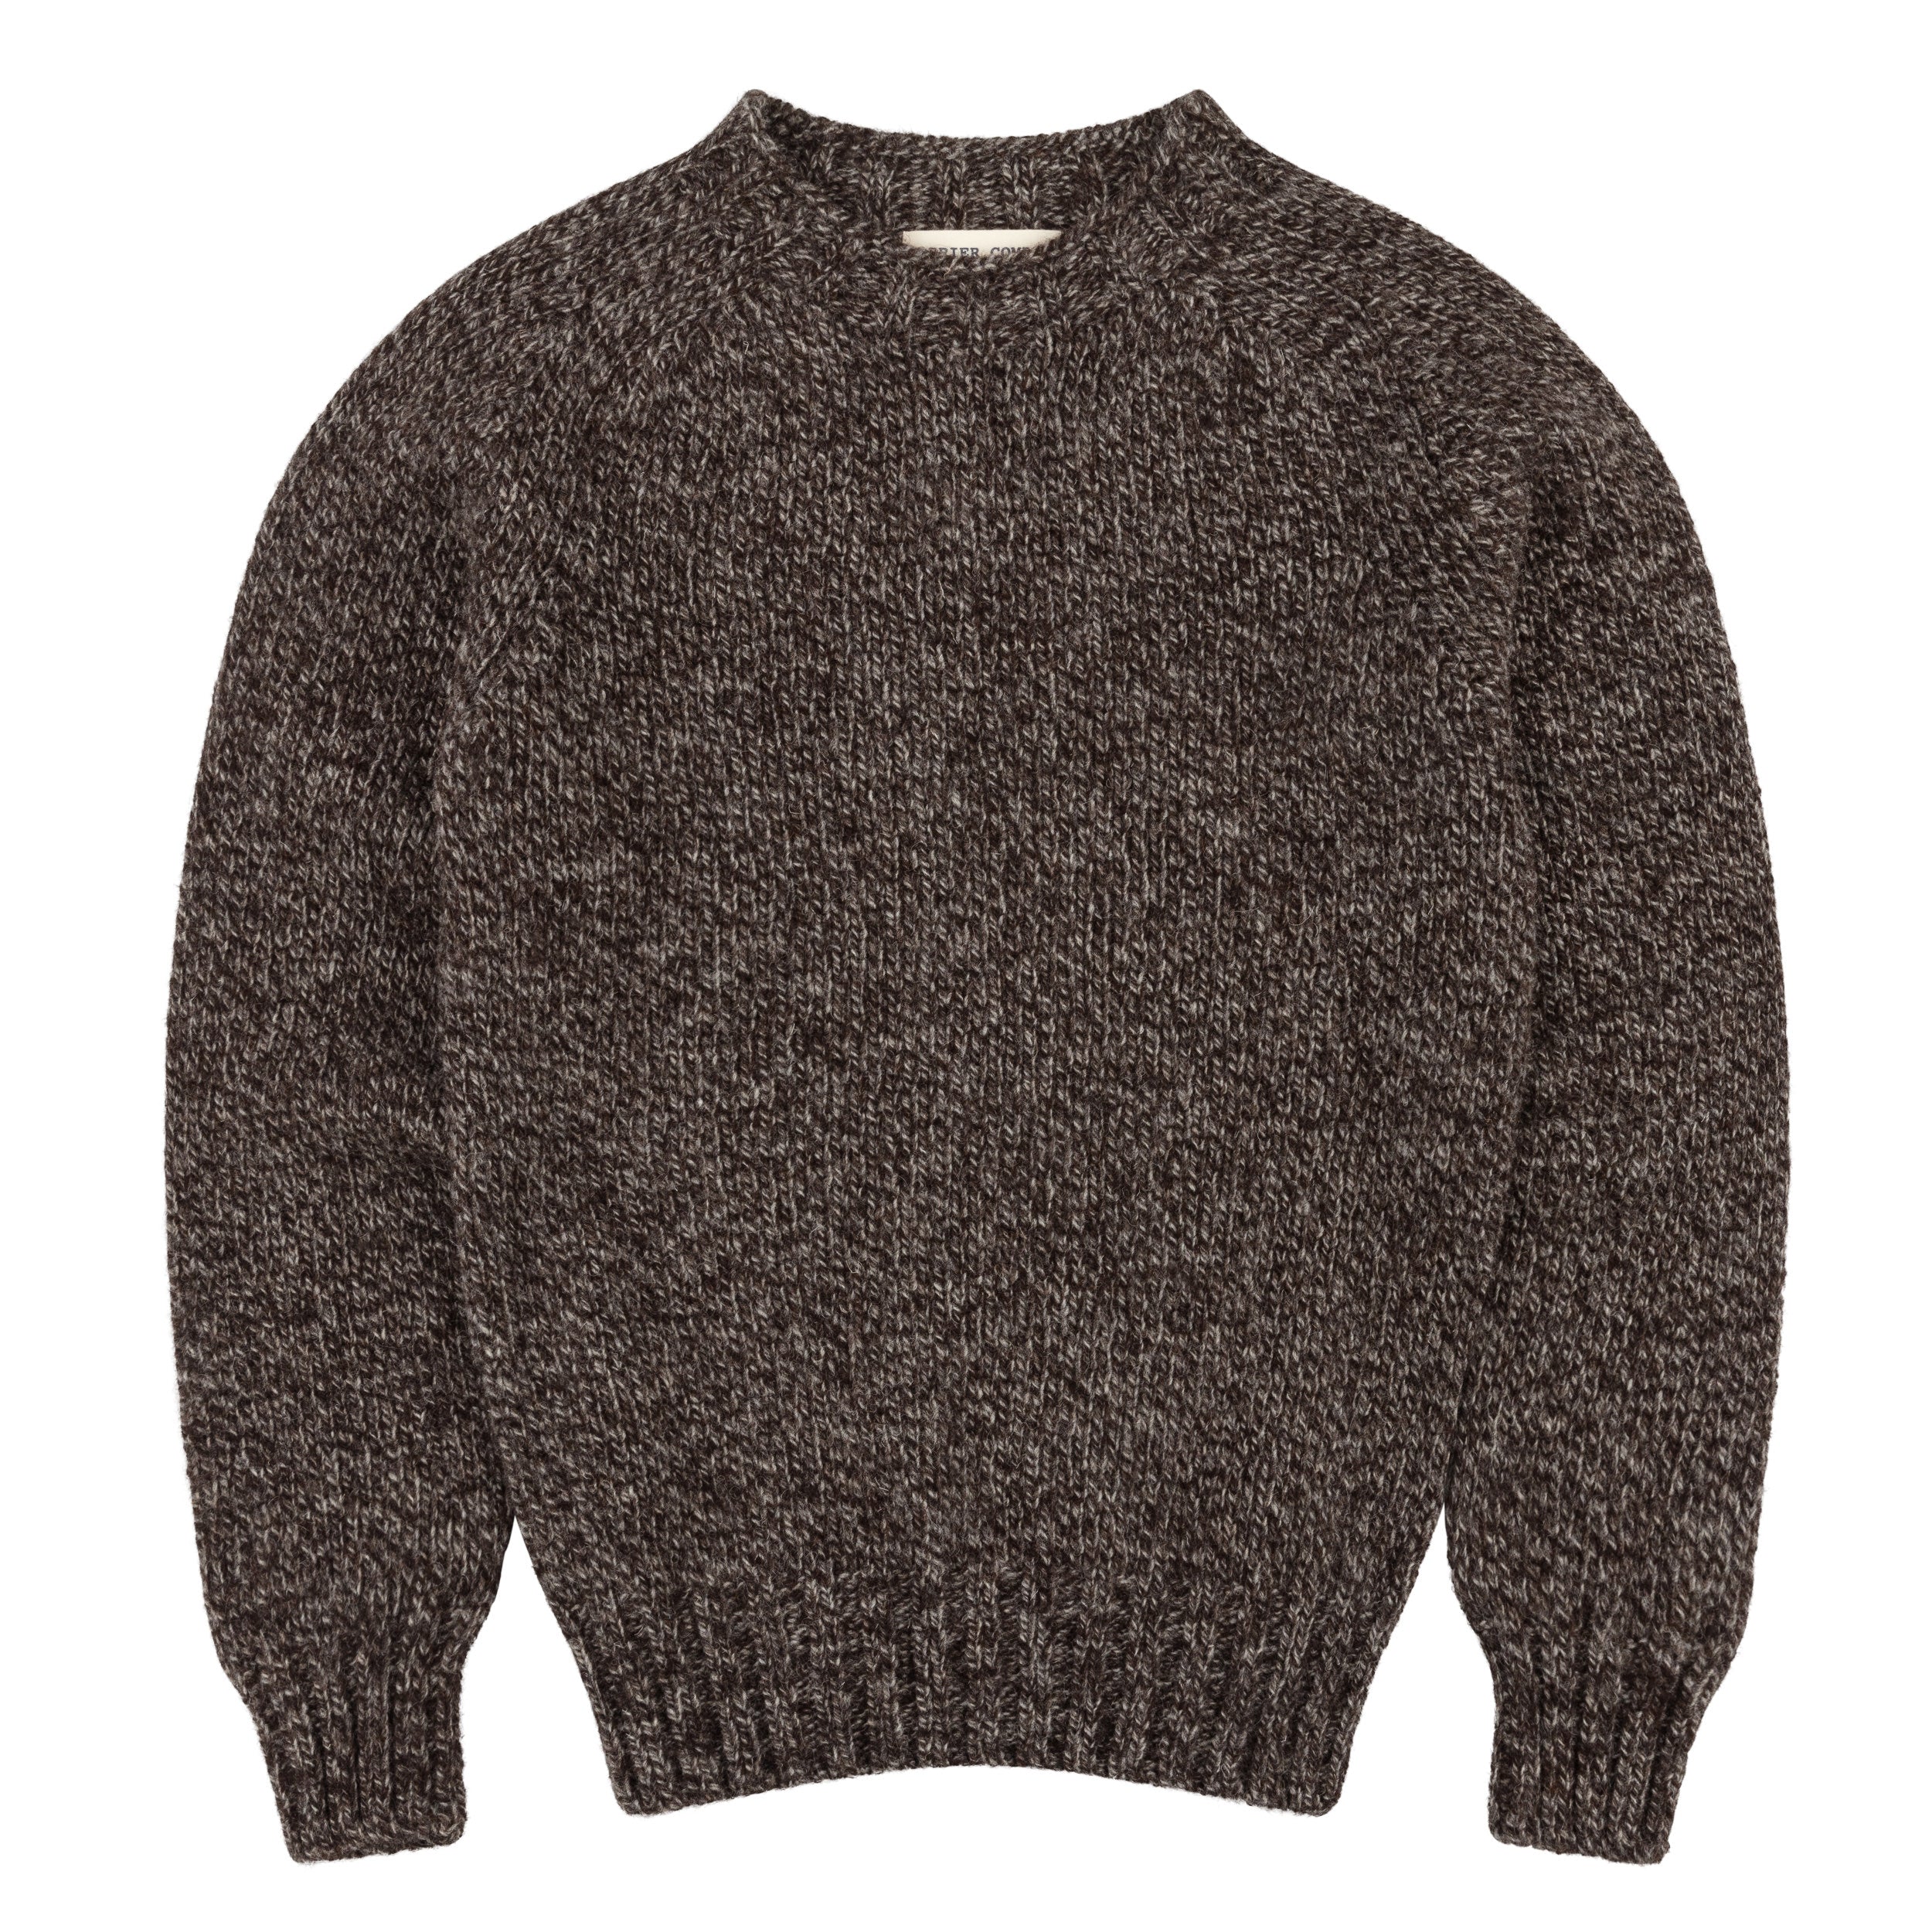 Carrier Company Heavy Heritage Breed Lambswool Jumper in Jacob